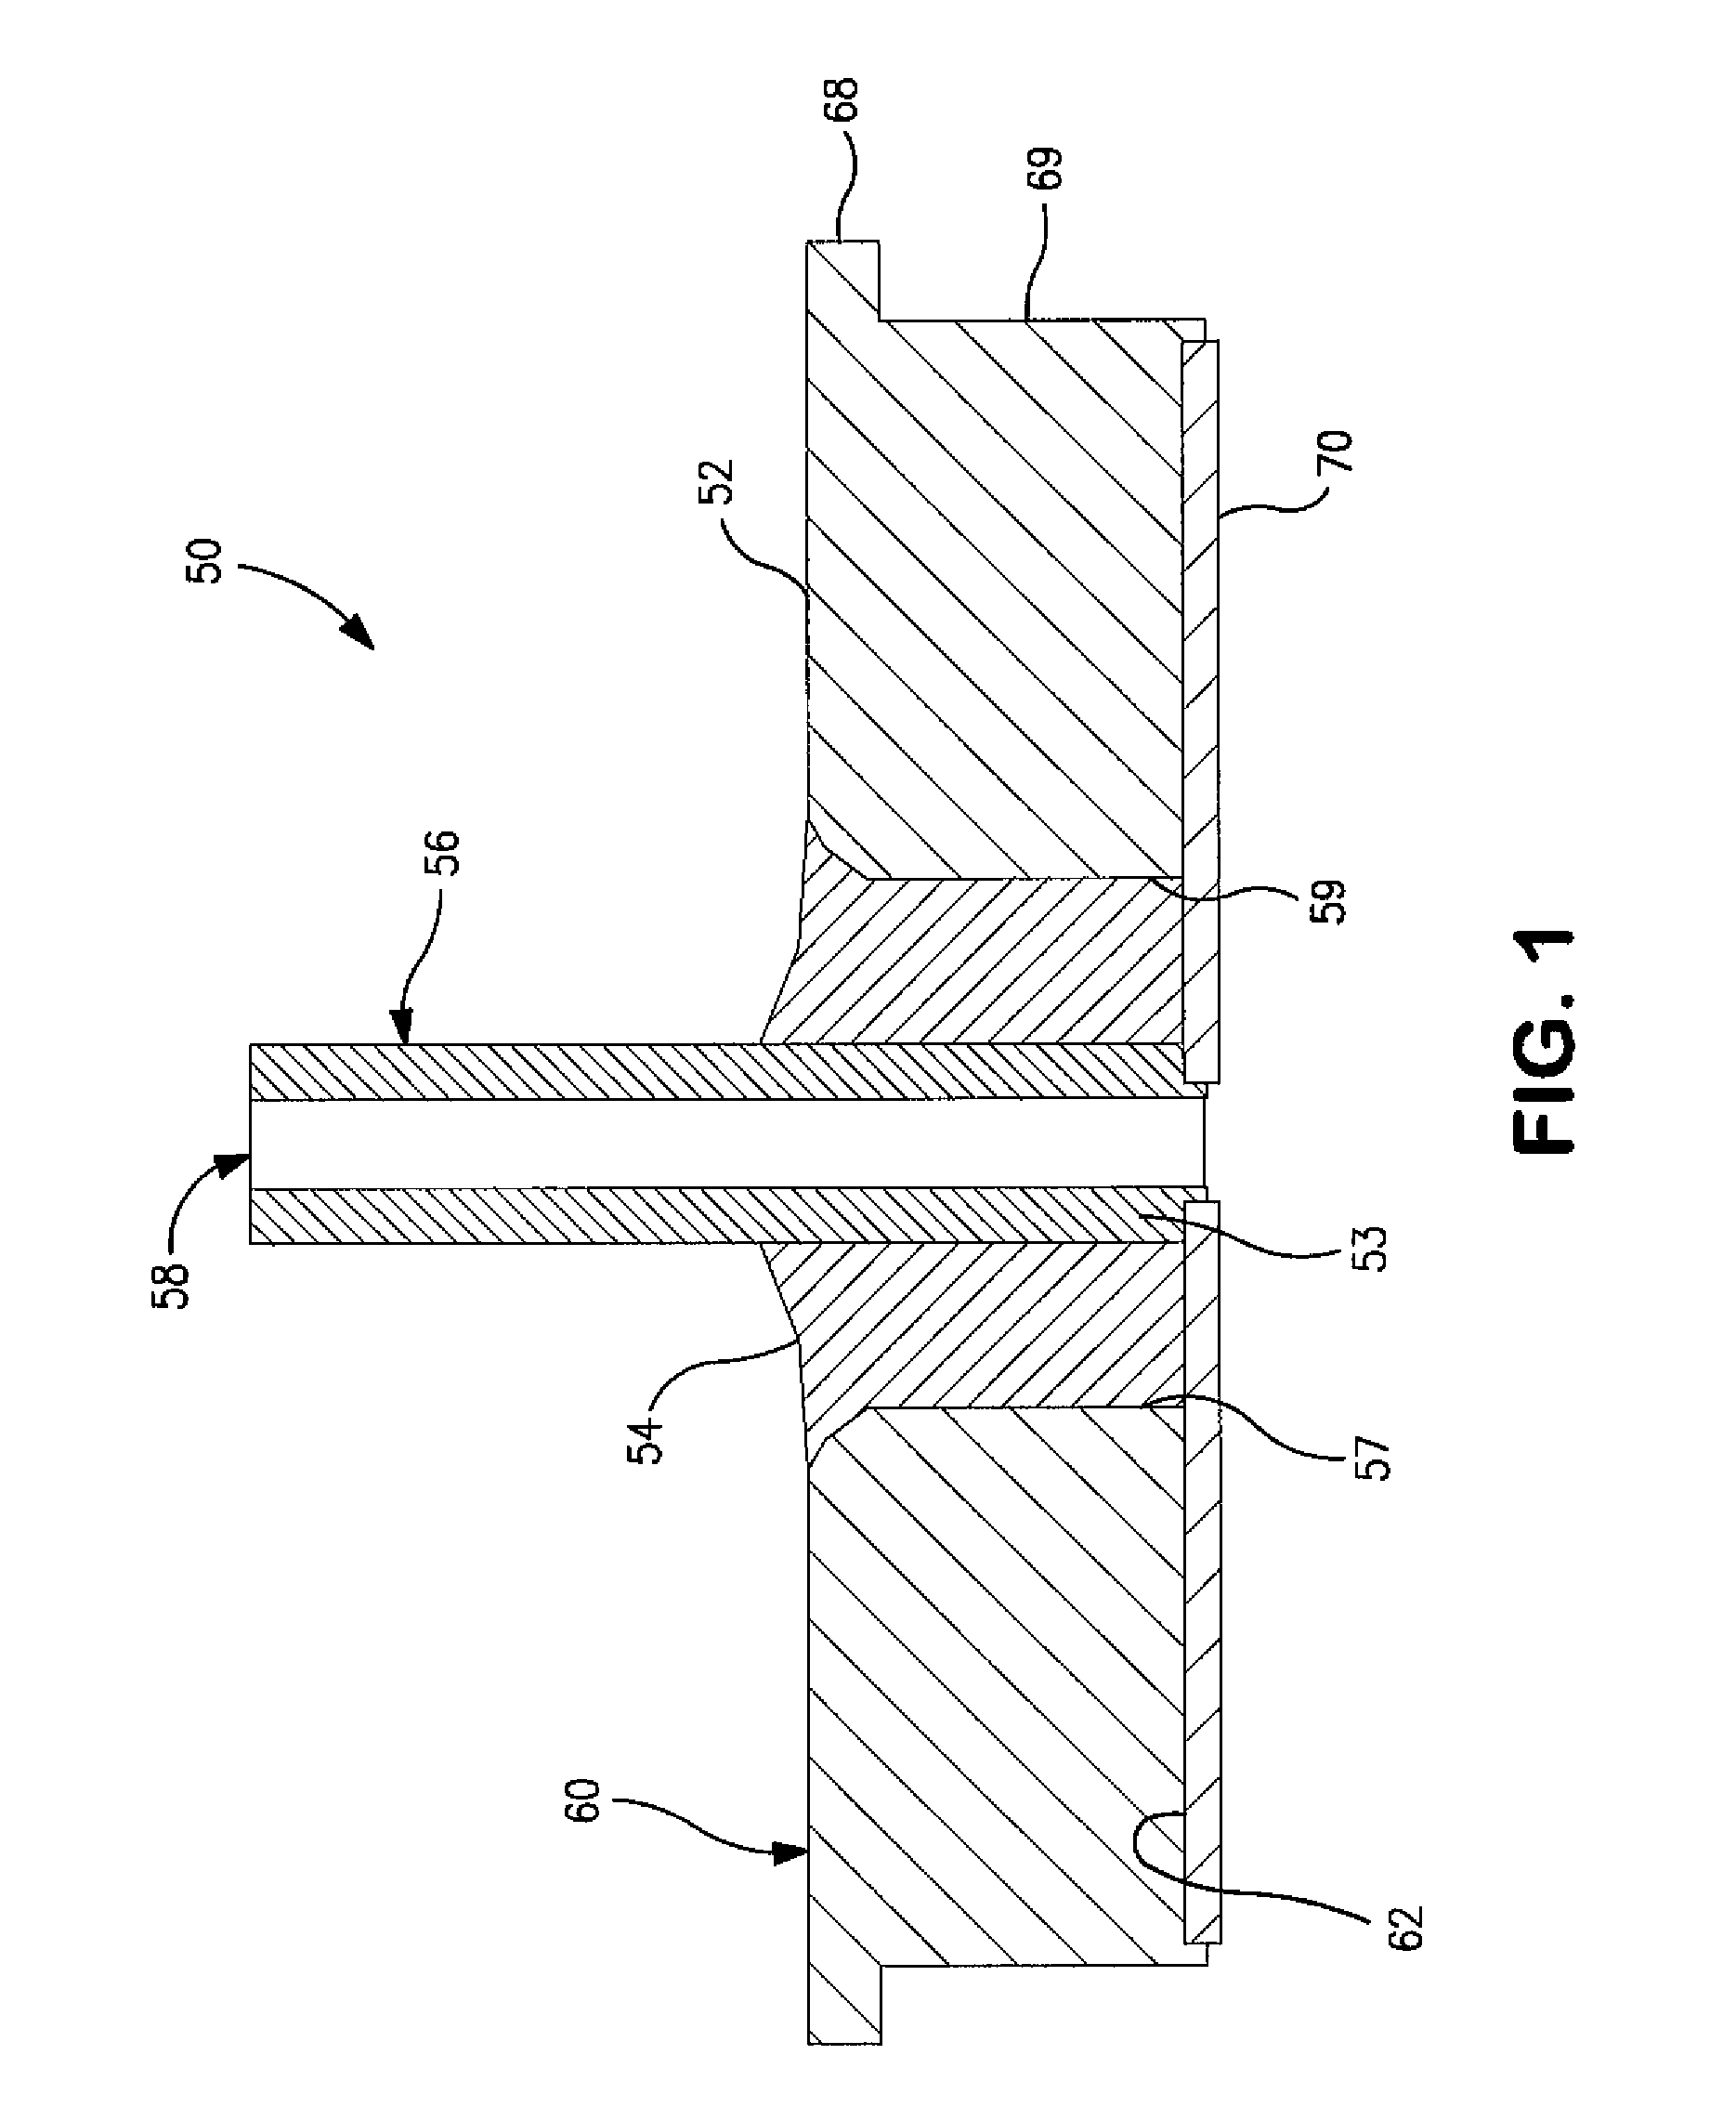 Hermetically sealed wet electrolytic capacitor